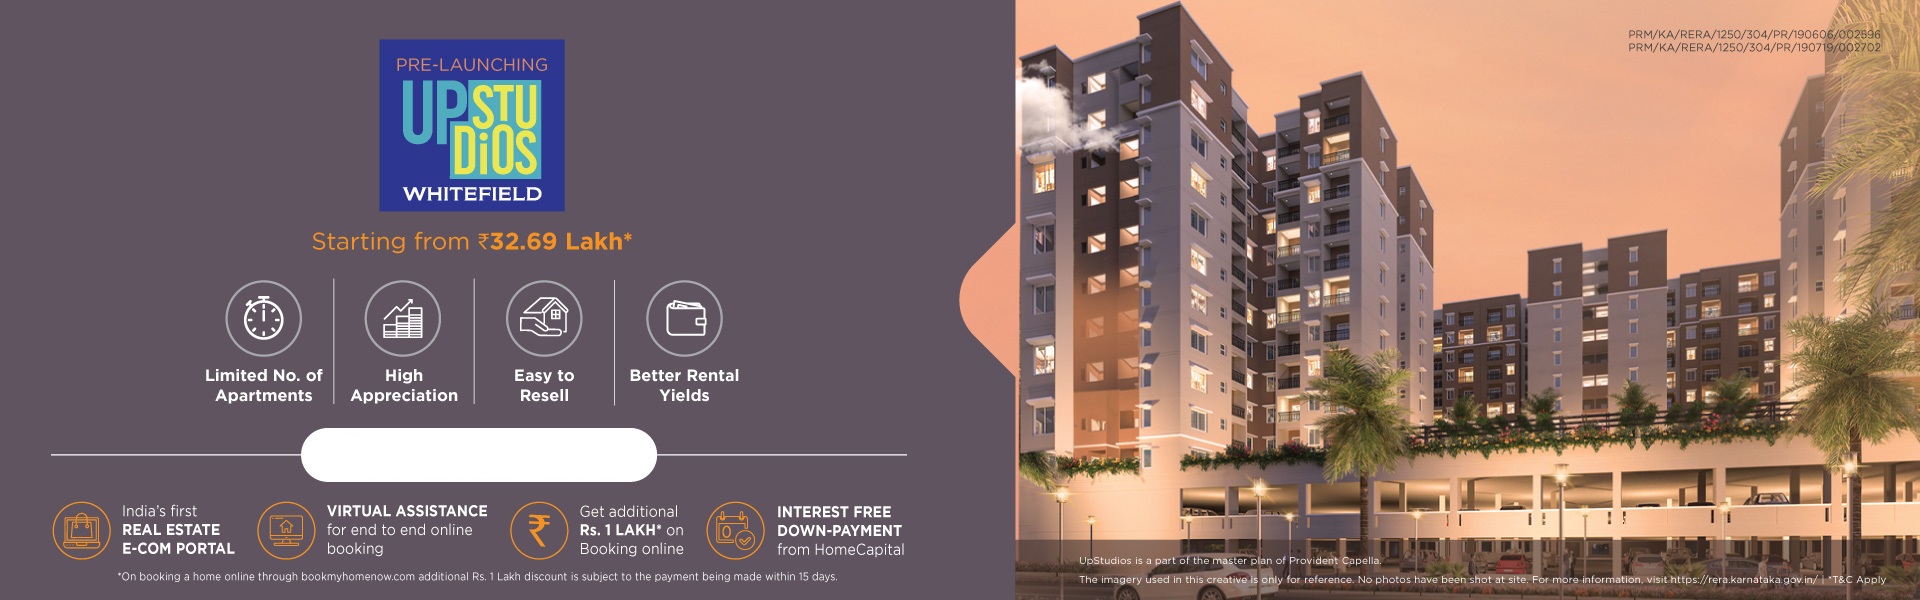 Pre-launching price Rs 32.69 Lac at Provident Upstudios, Bangalore